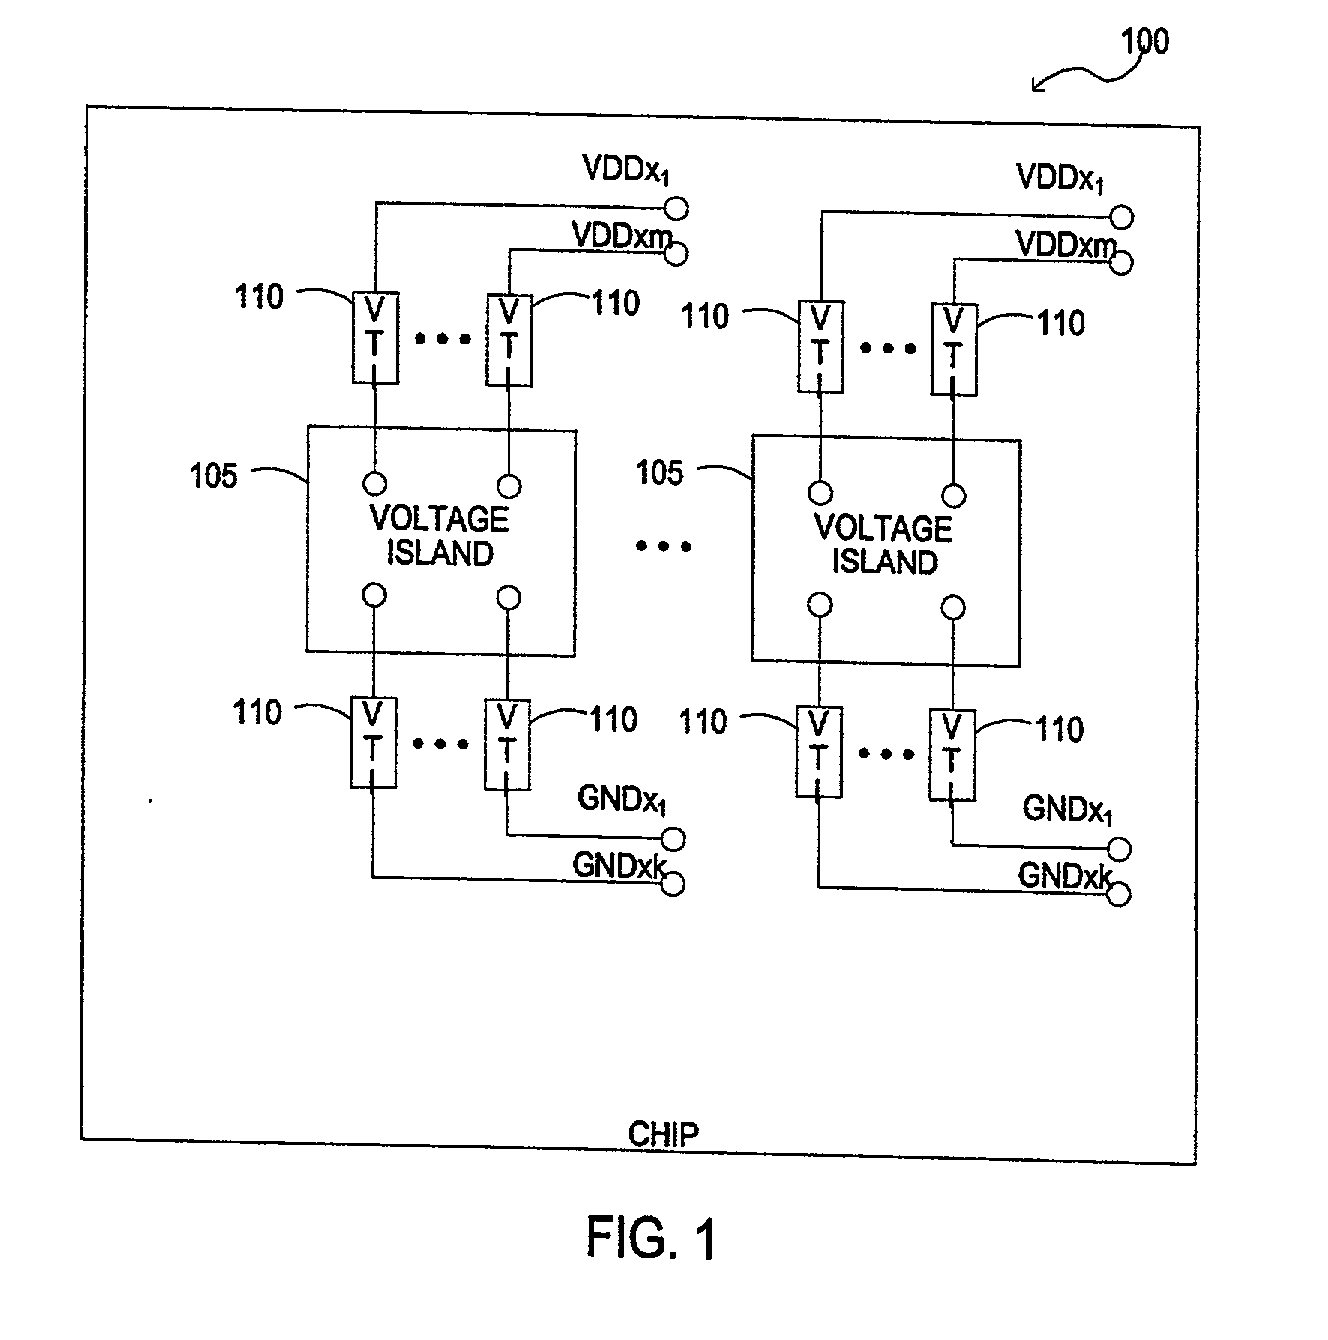 Method of analyzing integrated circuit power distribution in chips containing voltage islands